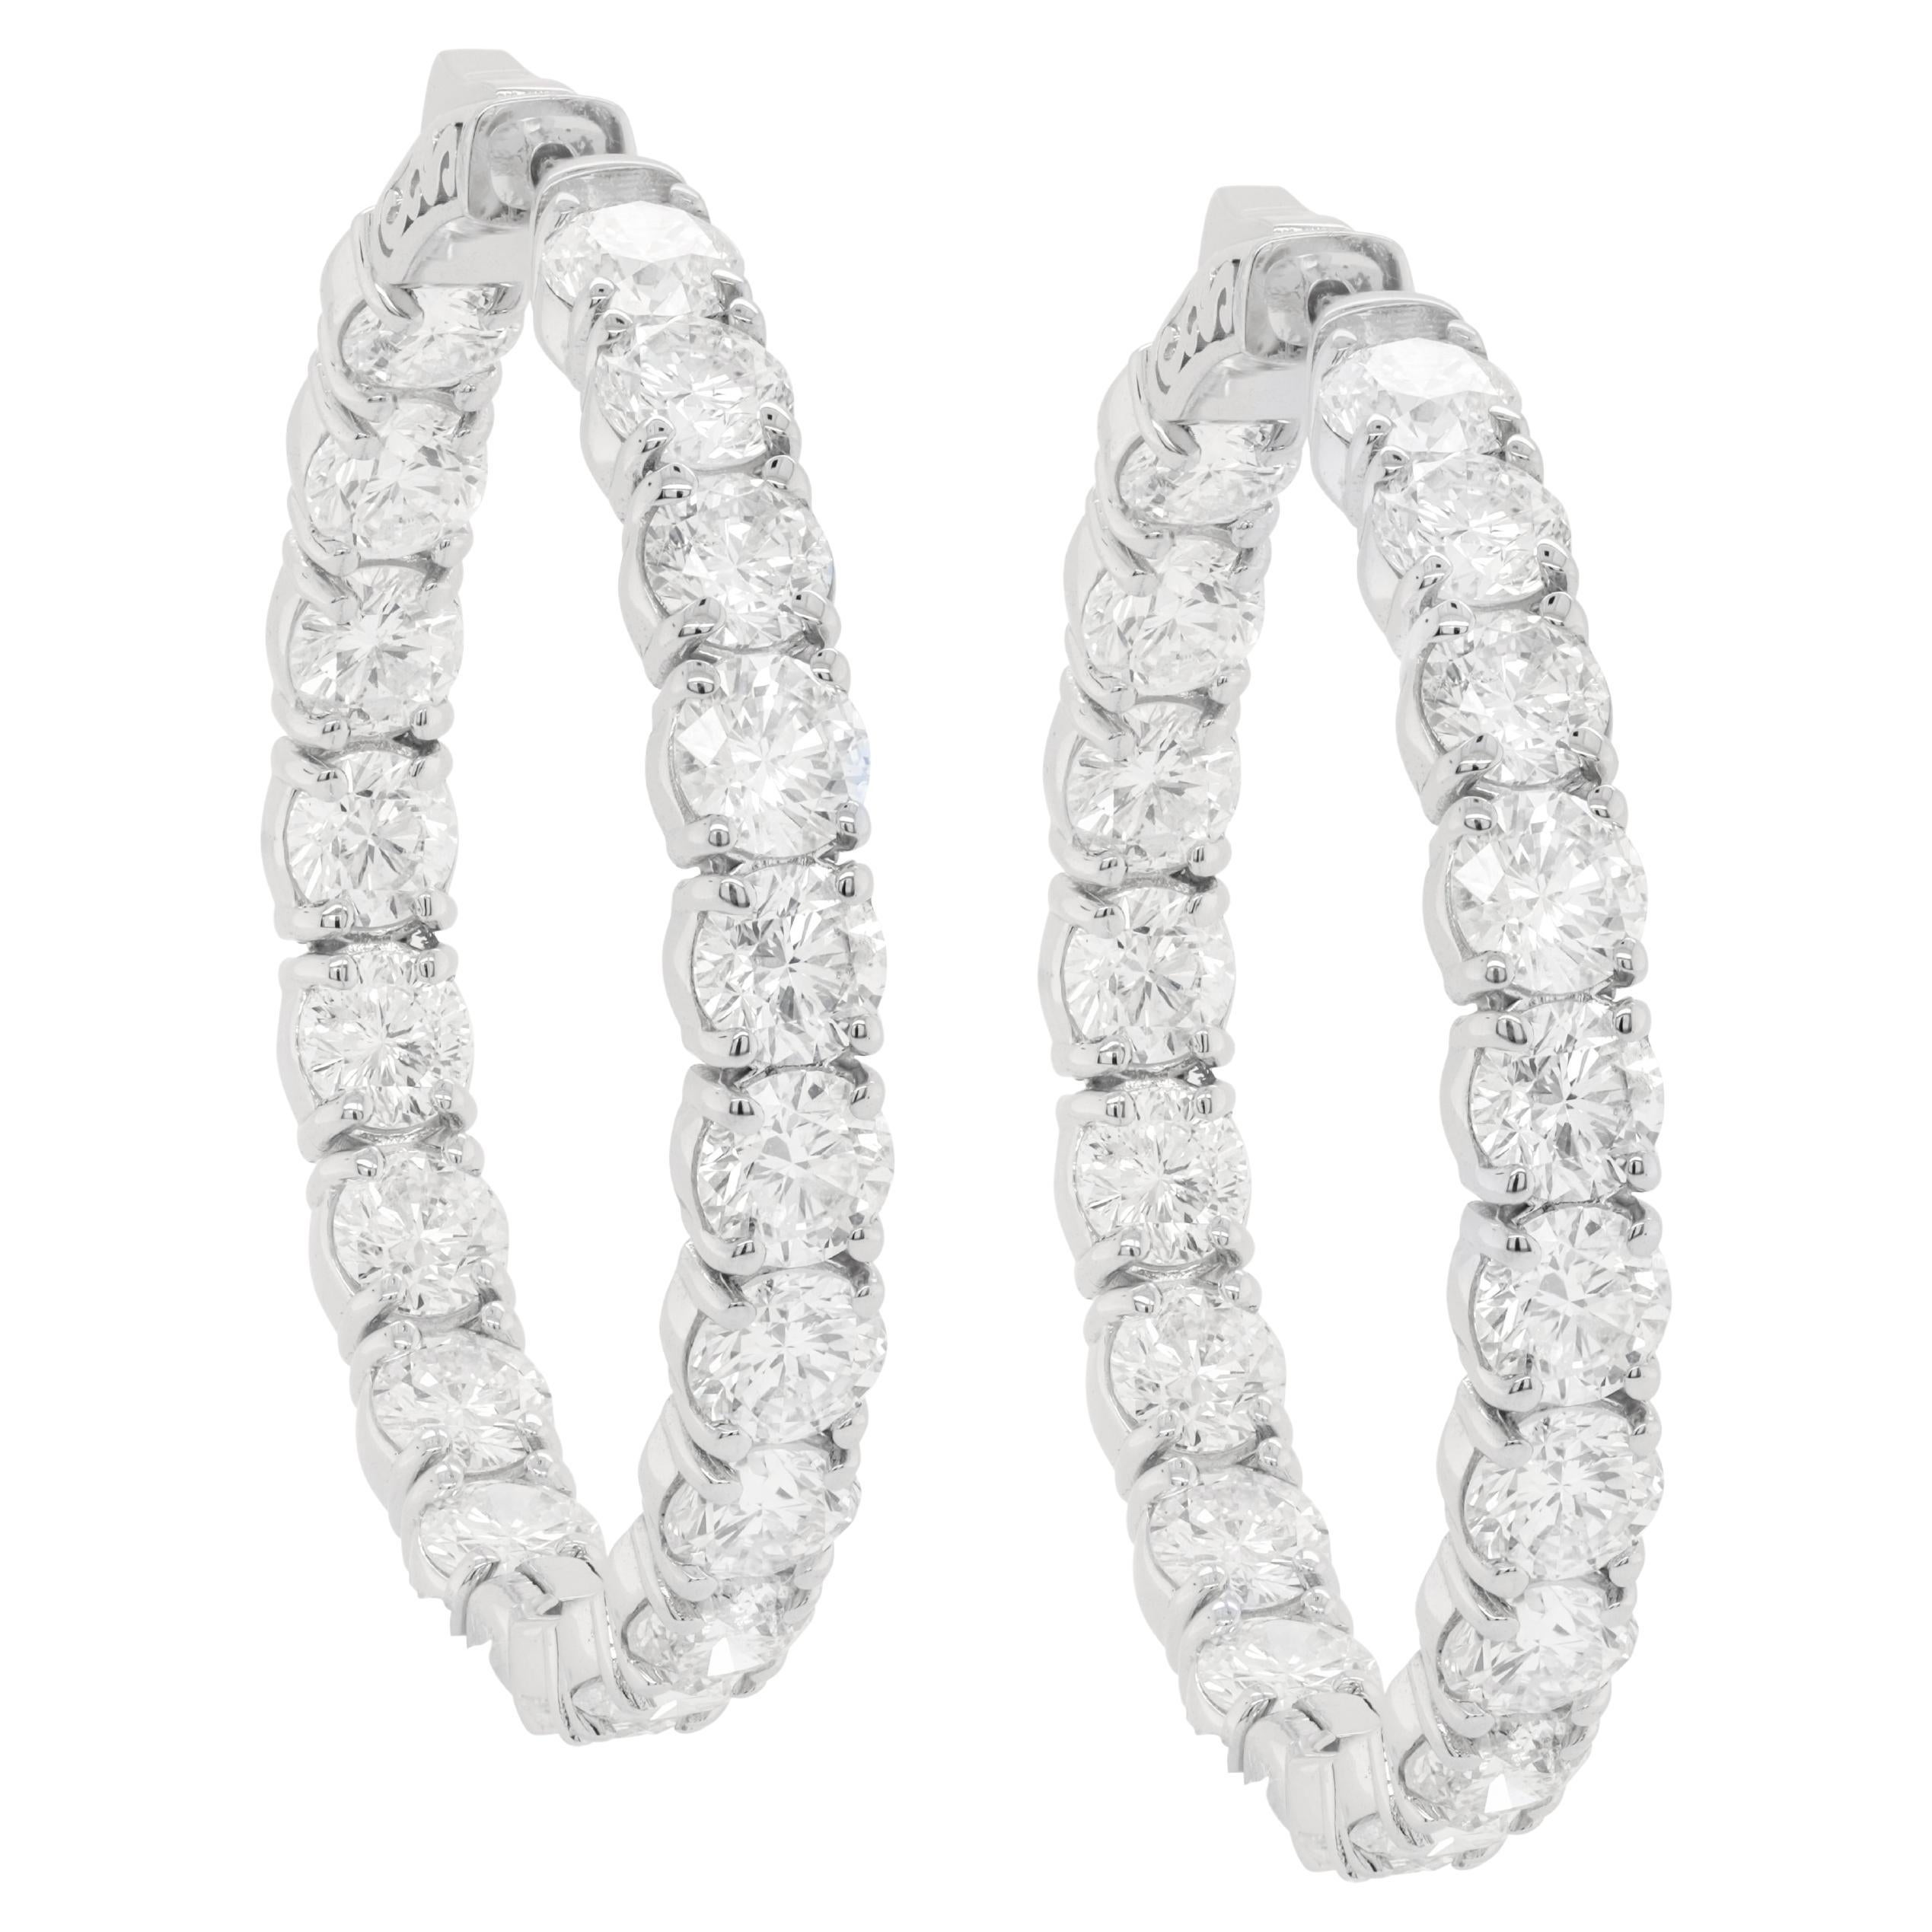 Diana M. 18 kt white gold, 1.50" inside-out hoop earrings adorned with 15.40 cts For Sale